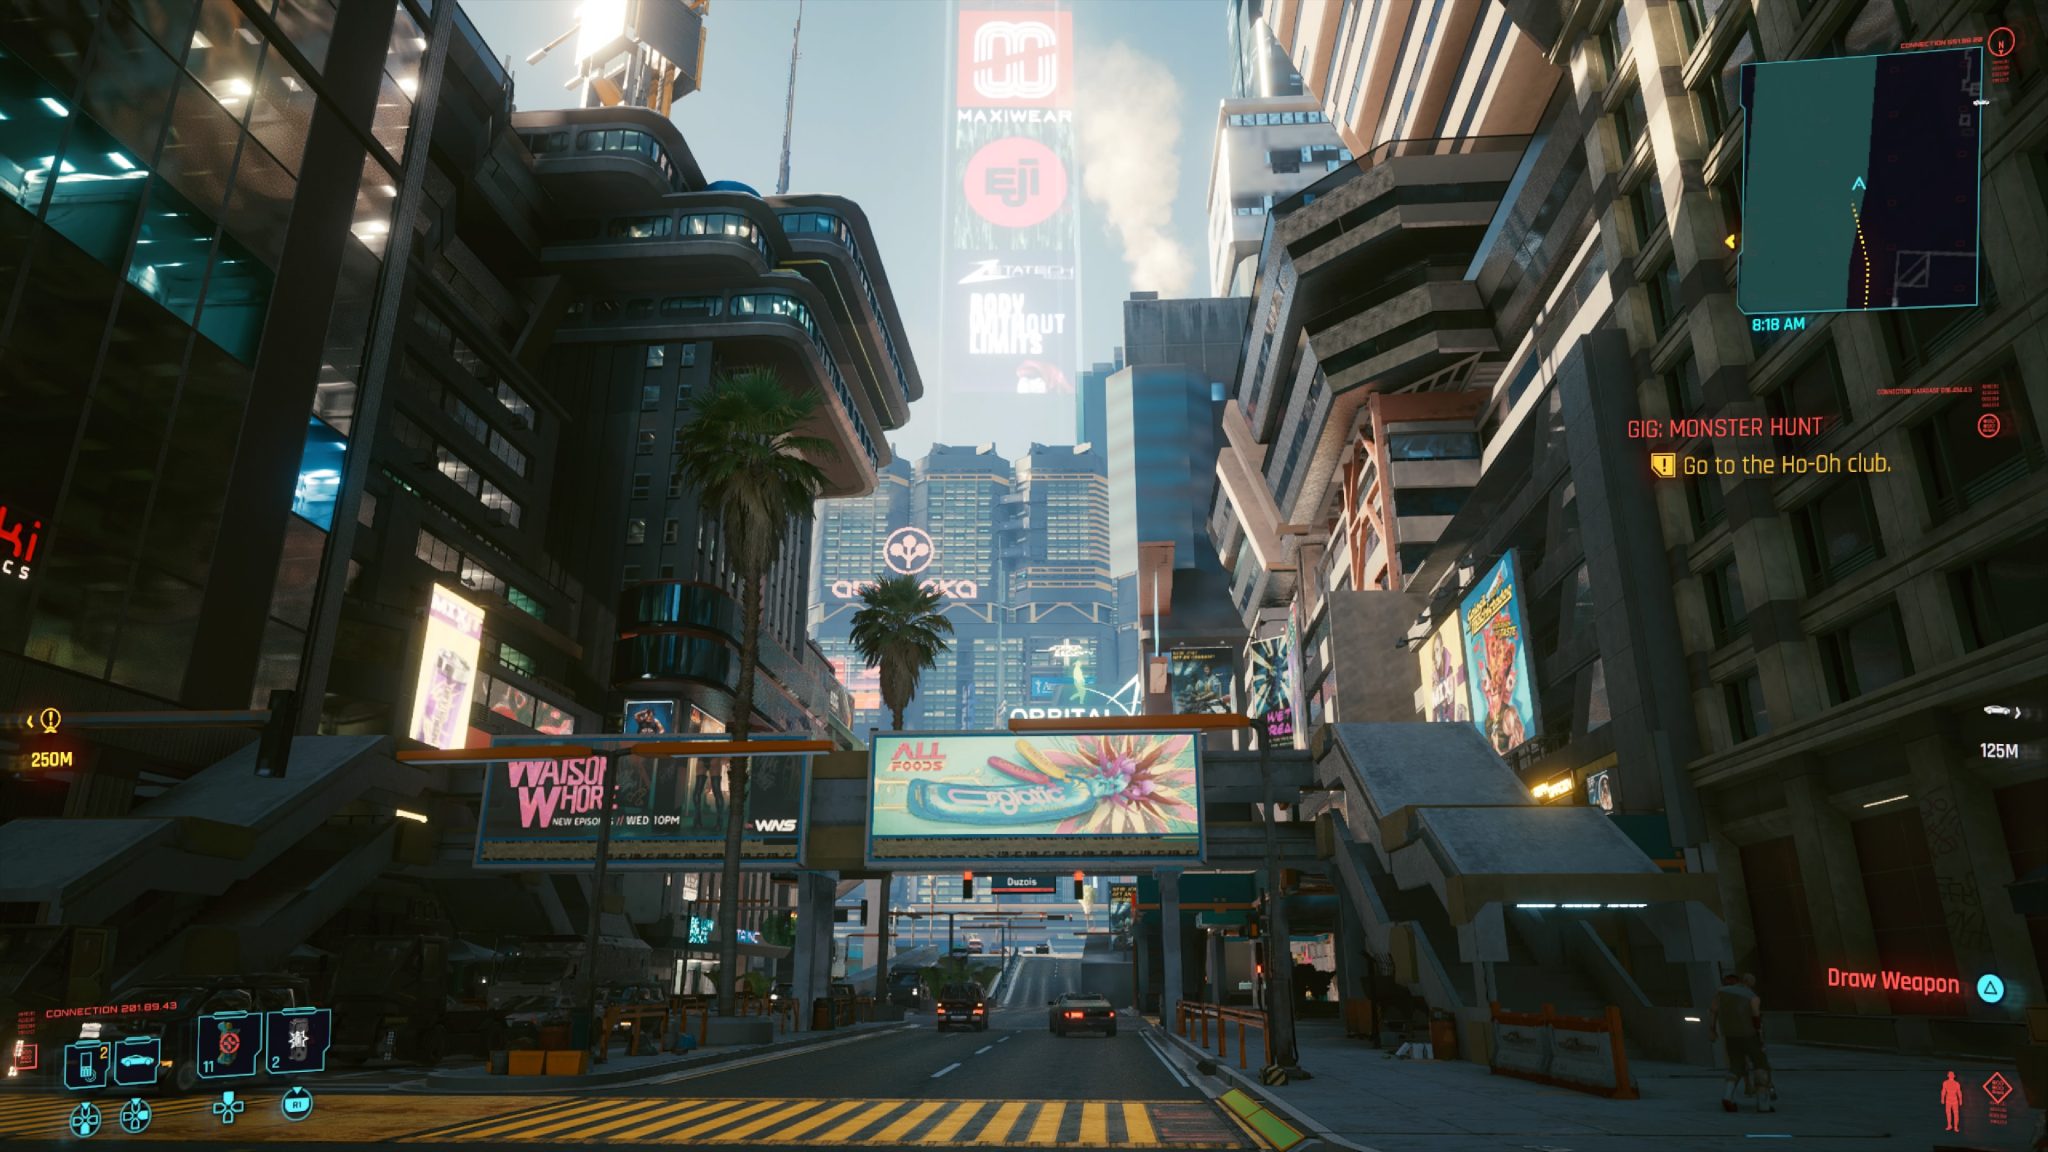 How does Cyberpunk 2077 run on the PS5?